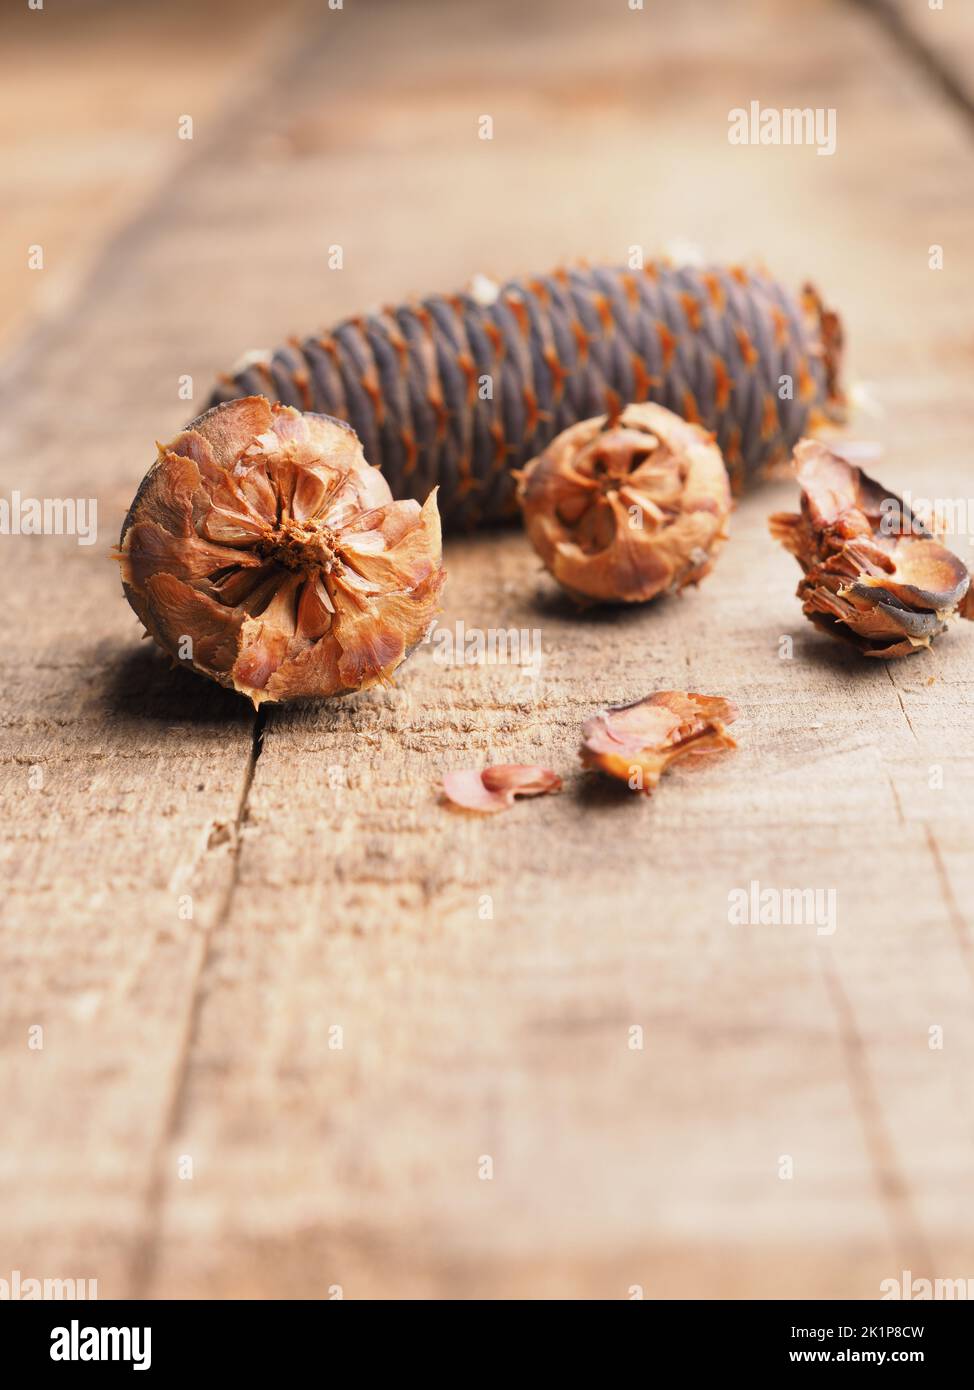 Korea fir seeds on a wooden garden table, Forestry and landscaping concept Stock Photo